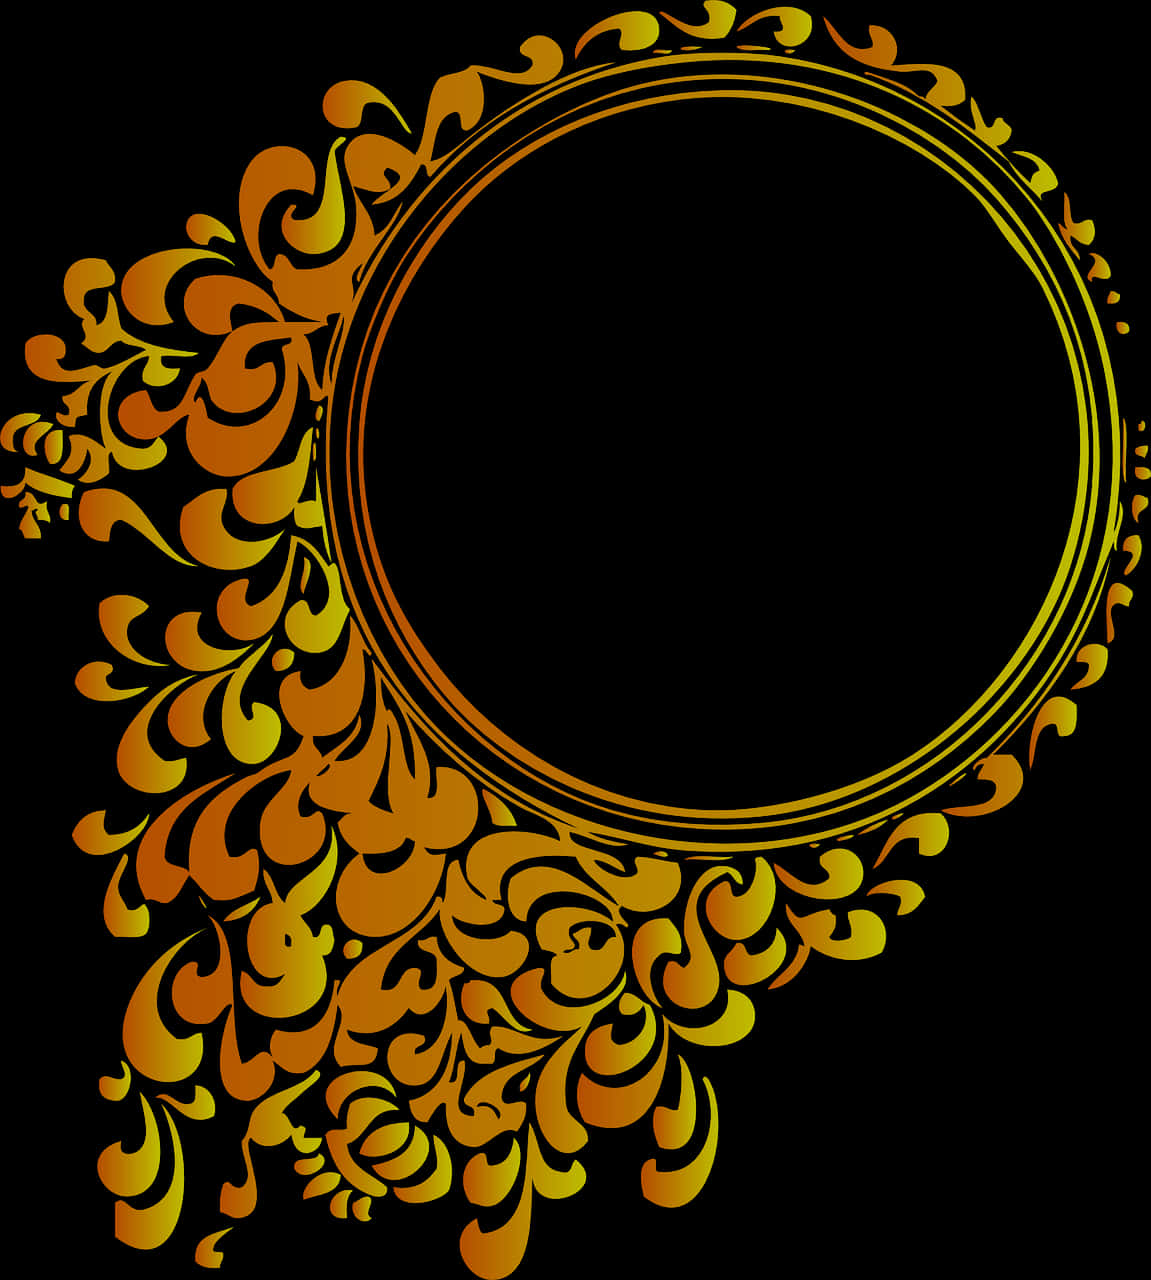 A Circular Gold Frame With A Black Background